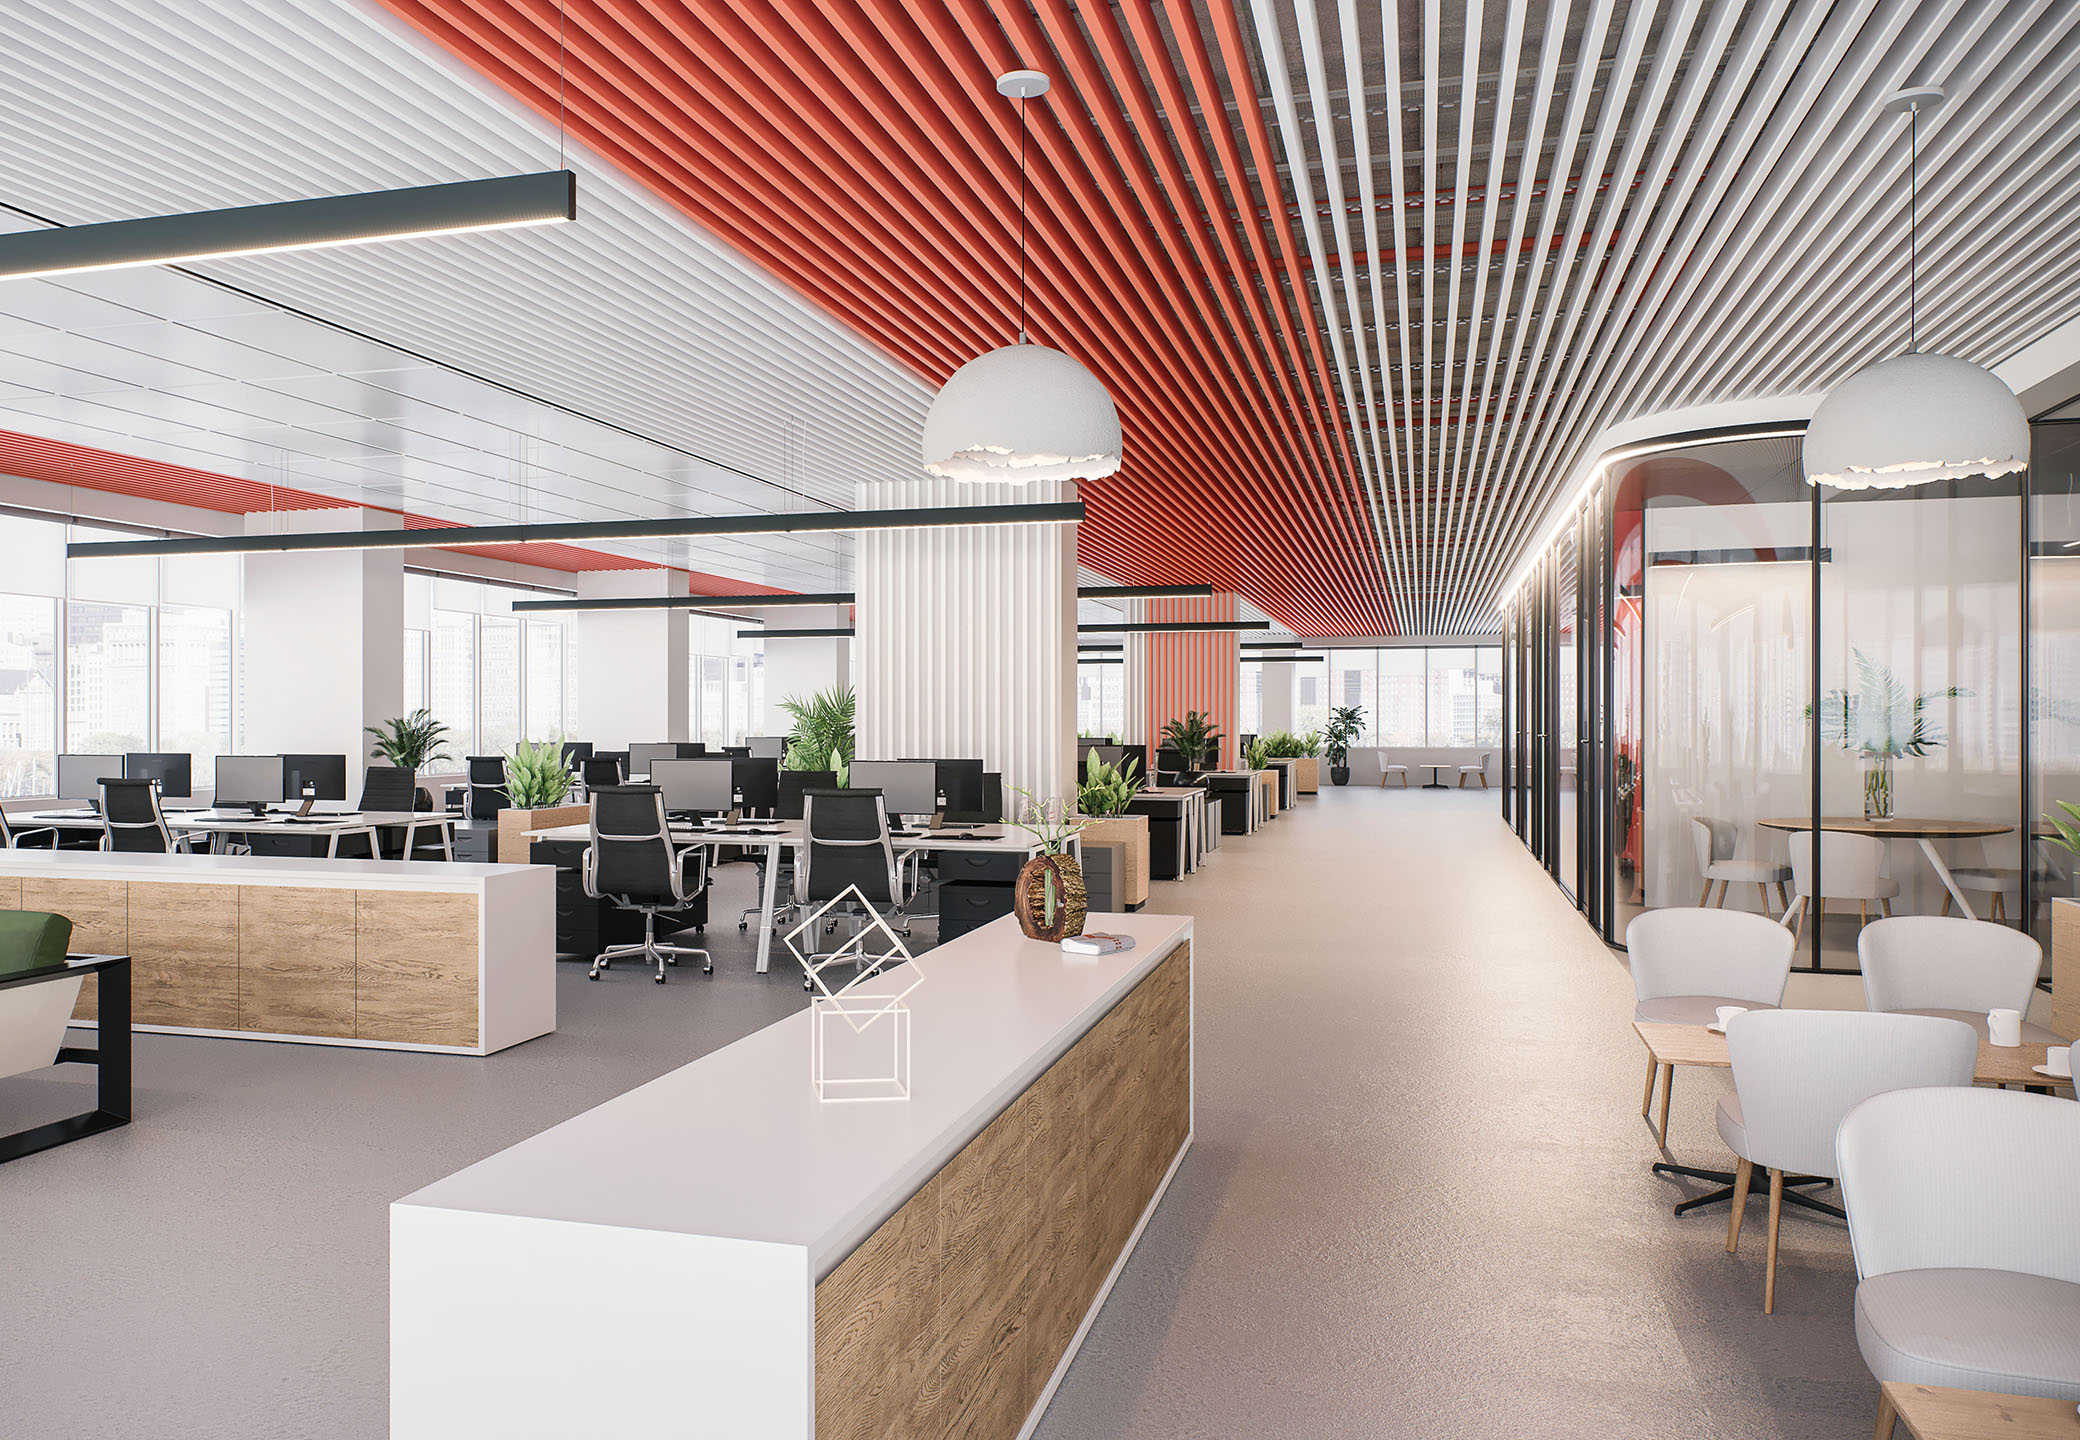 Kraft linear strip ceiling in the interior of the office